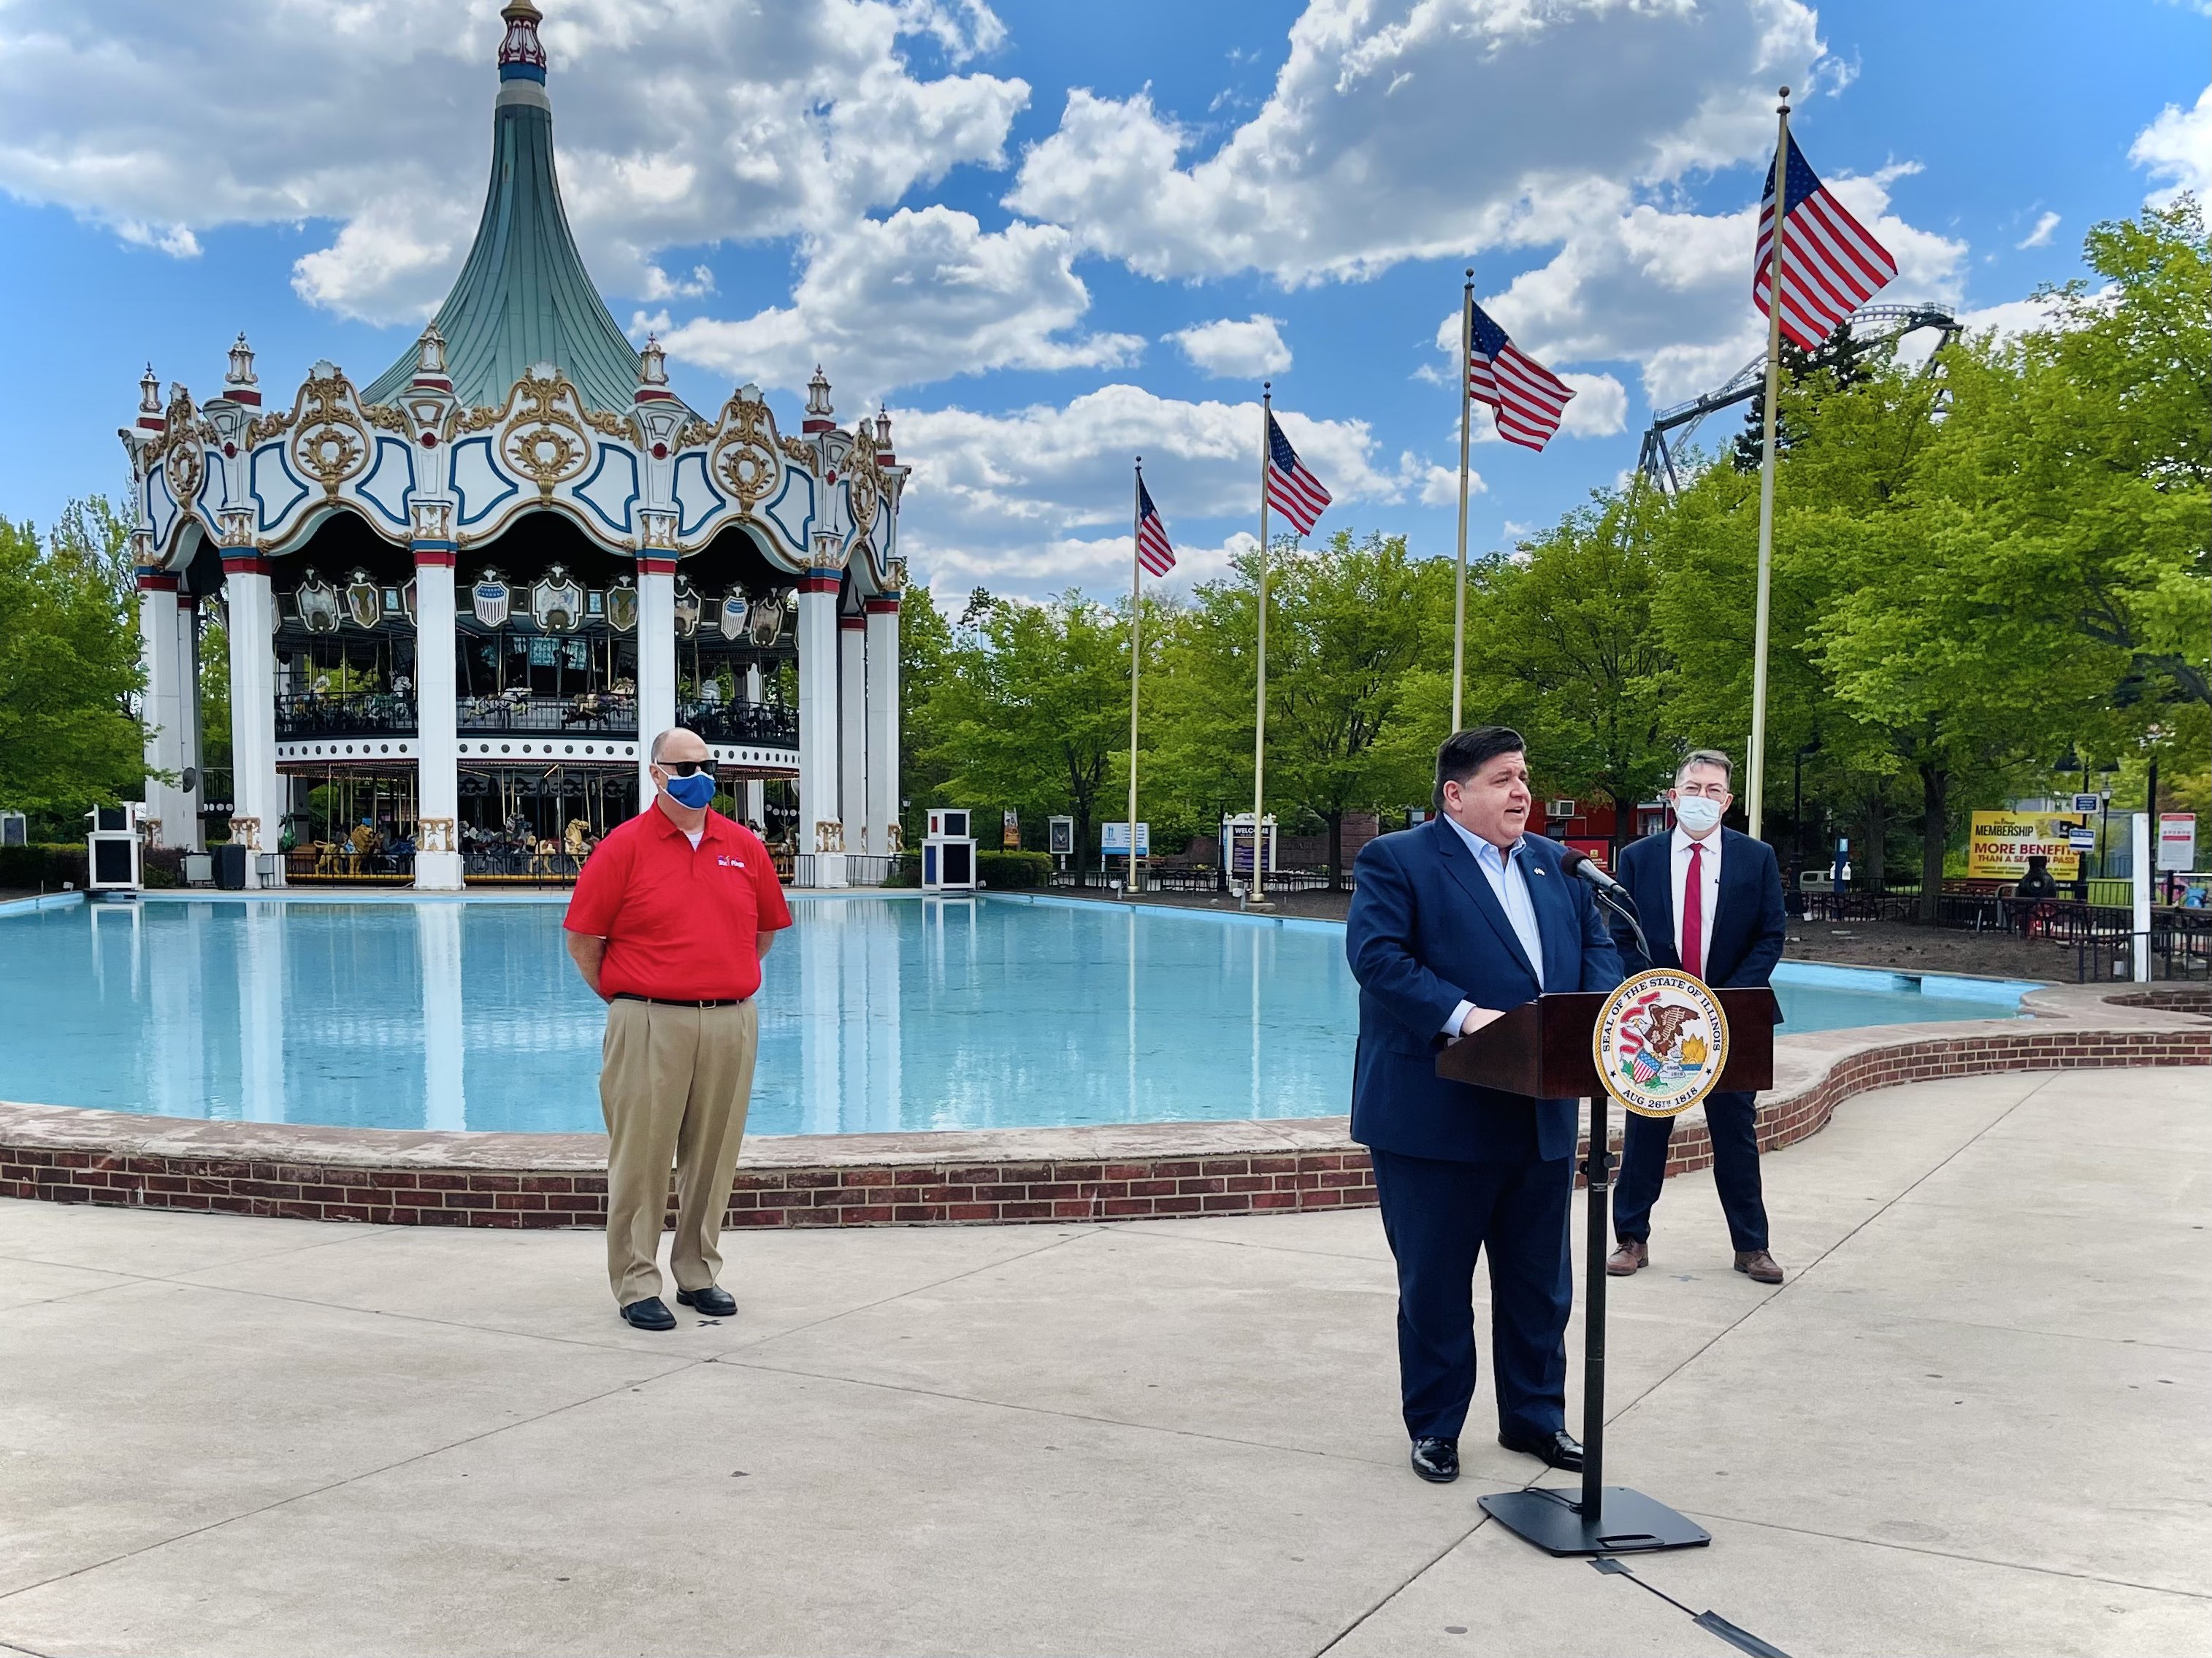 Back to Summer Fun: Gov. Pritzker Announces 50,000 Free Six Flags Tickets in Effort to Vaccinate Youth in Underserved Communities